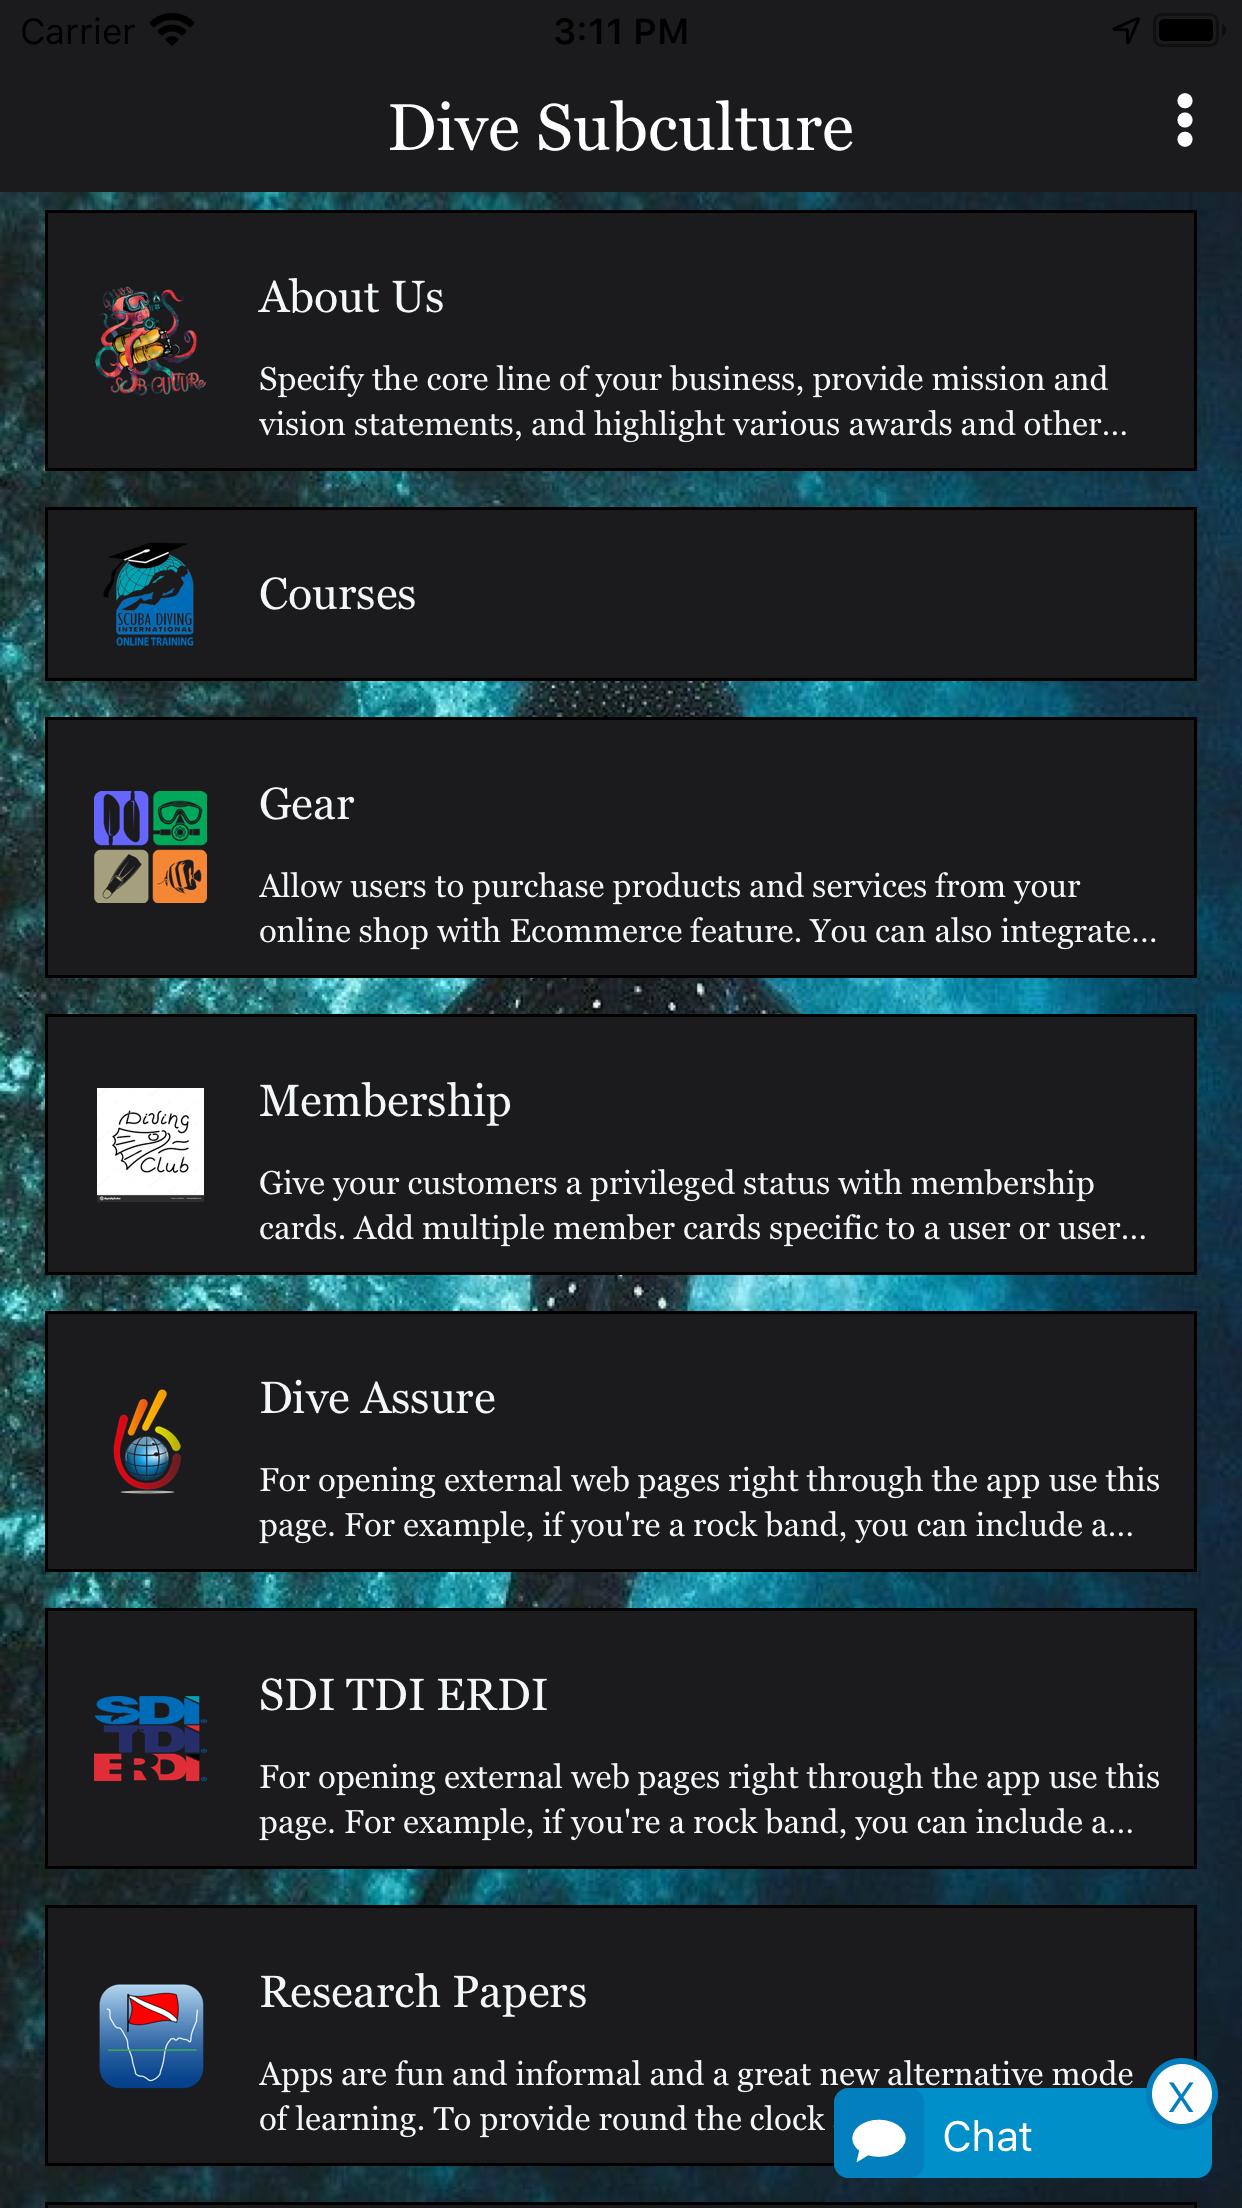 Dive Subculture for Android - APK Download